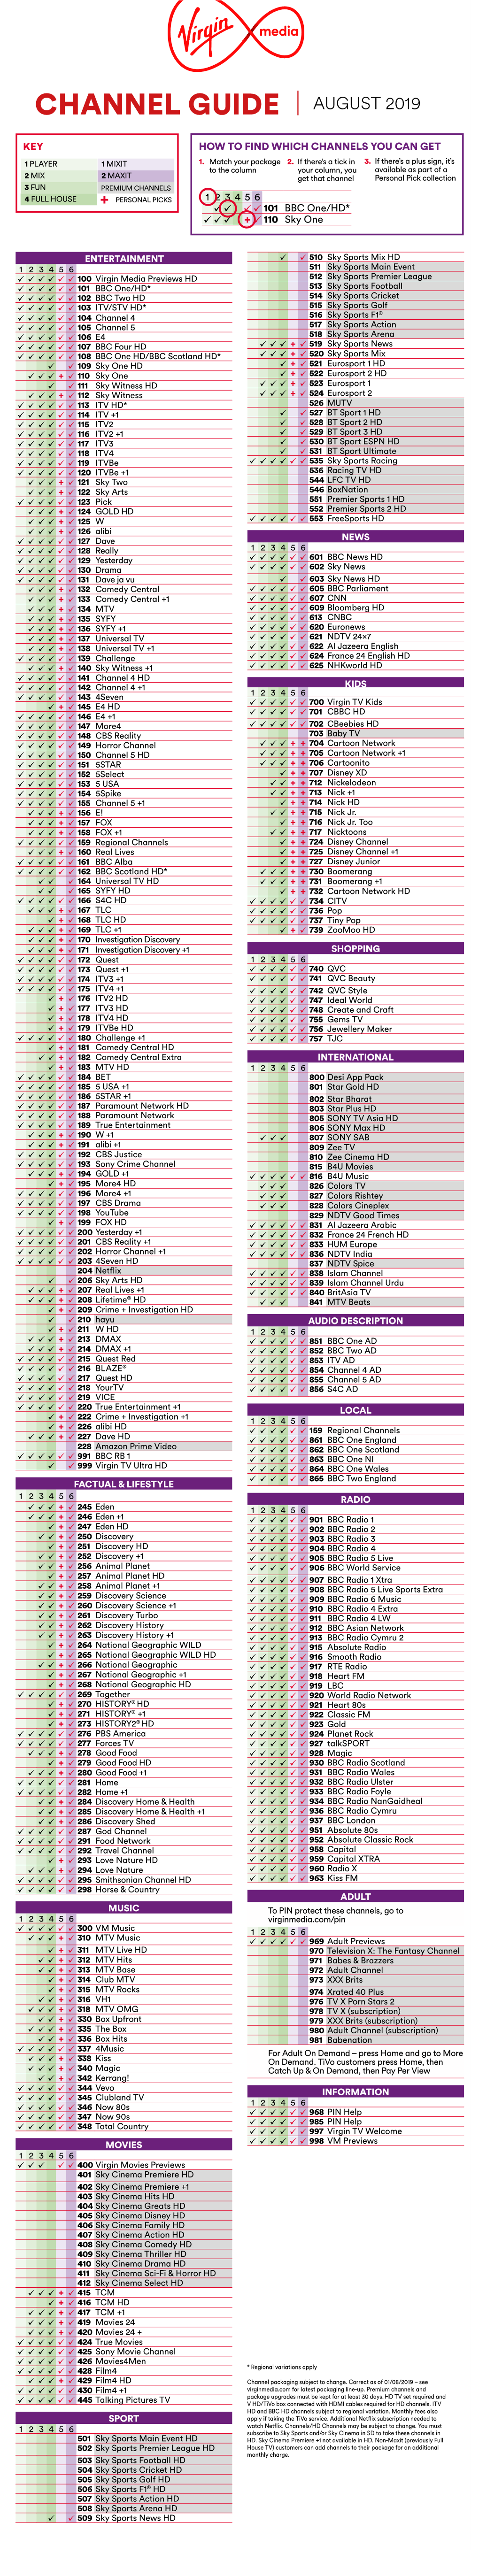 Channel Guide August 2019